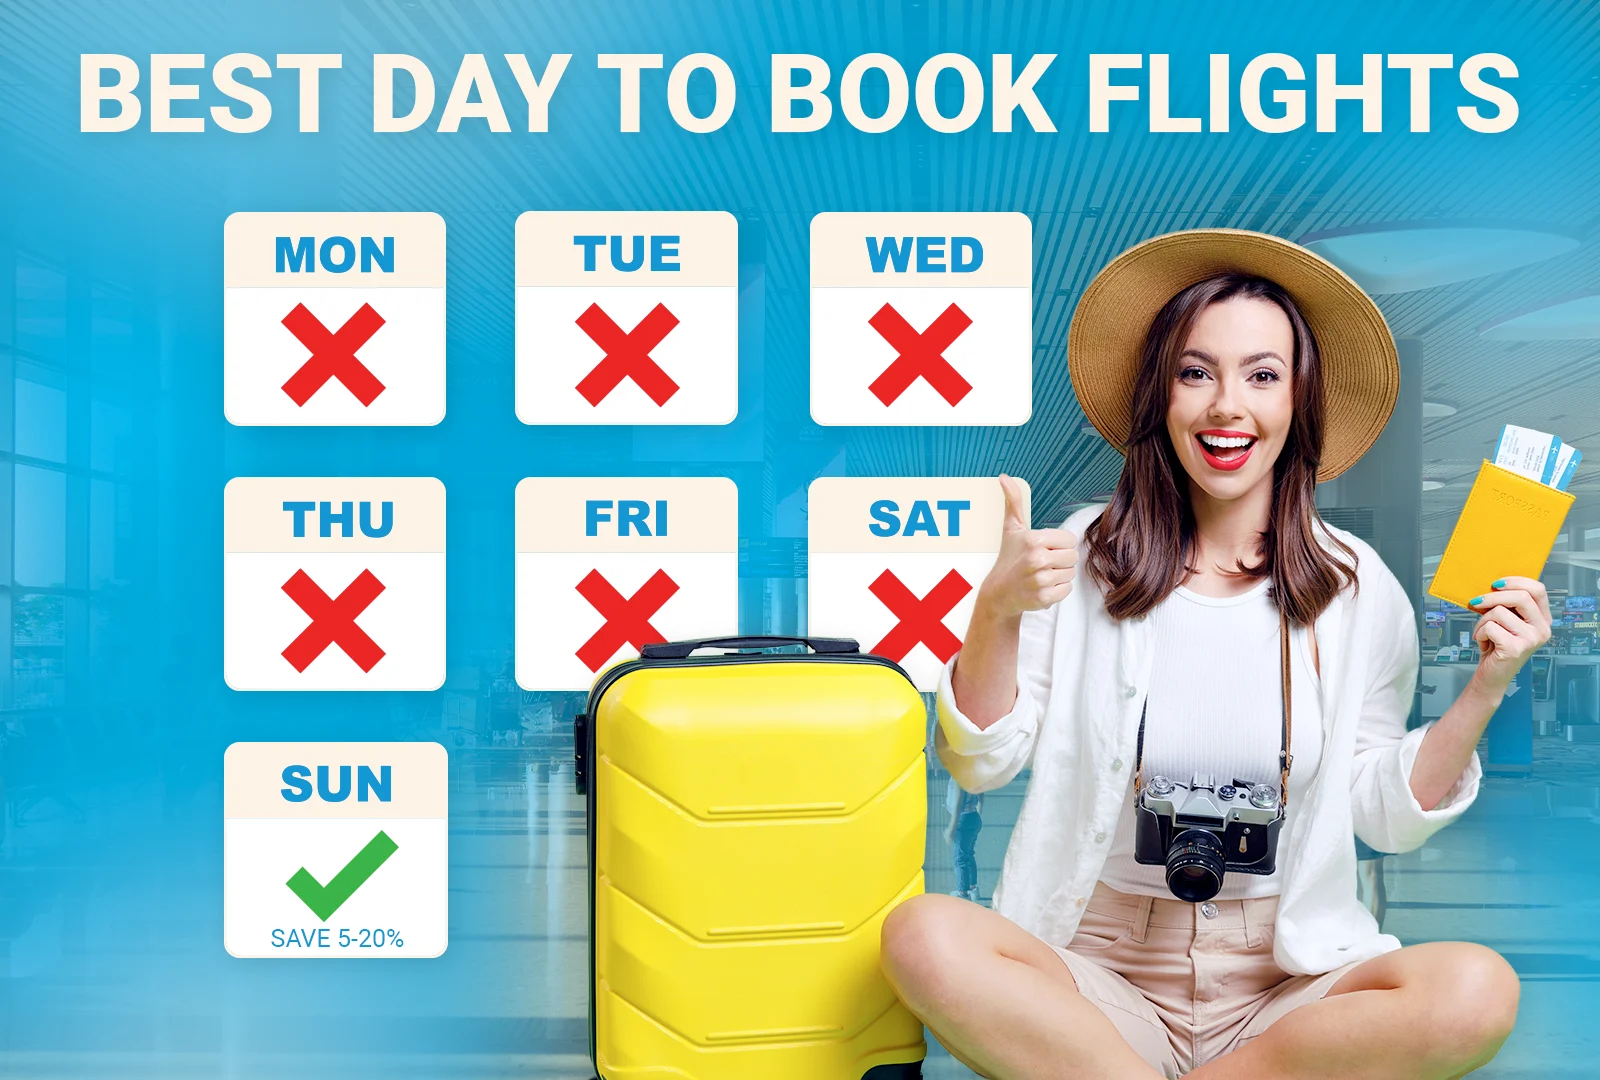 Woman with a suitcase smiling and excited to be going on a trip with the best days to book flights in a graph